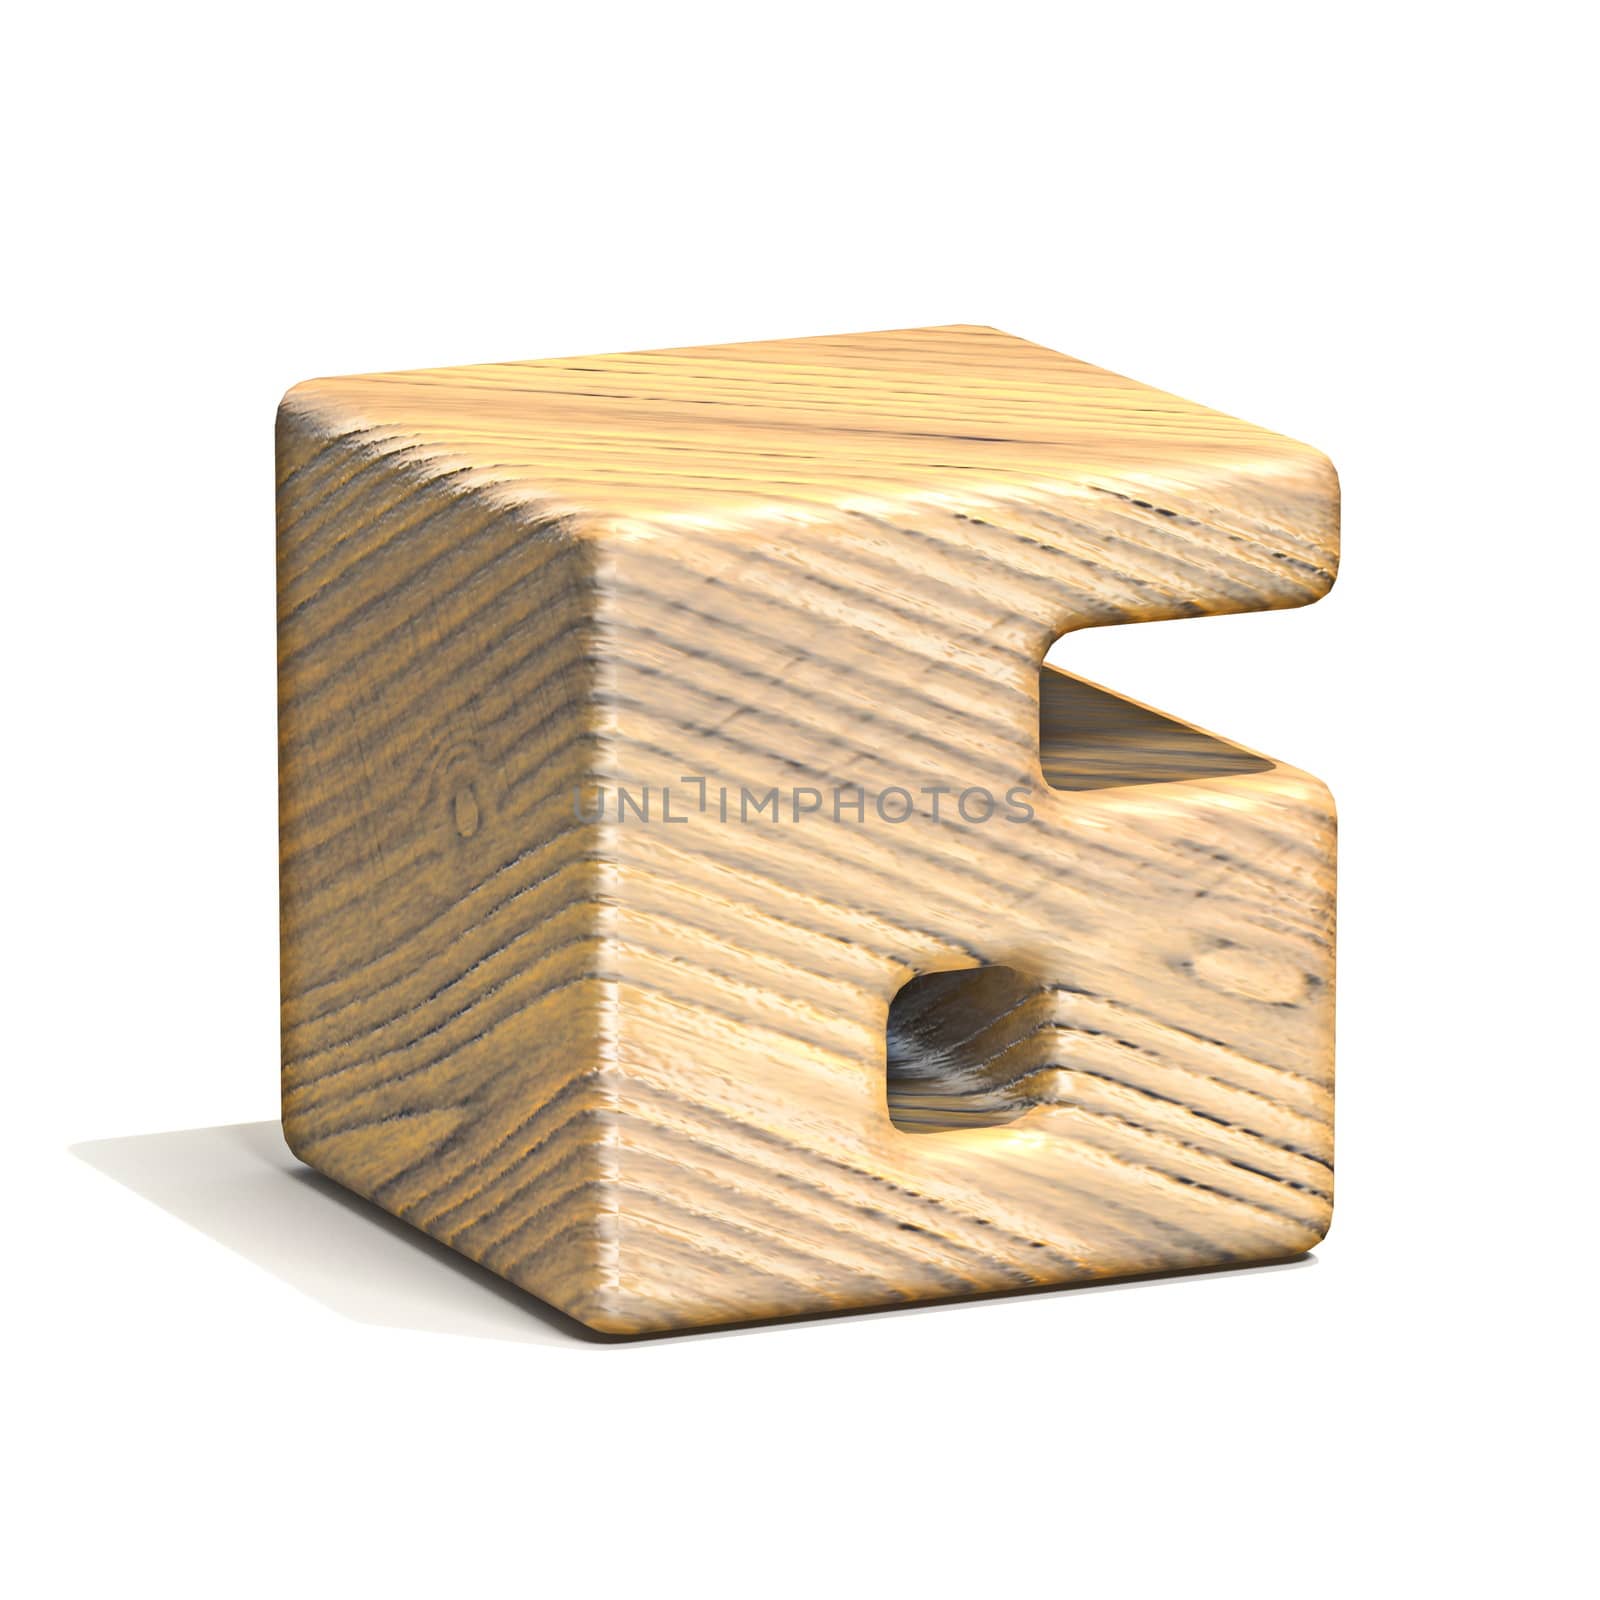 Solid wooden cube font Number 6 SIX 3D render illustration isolated on white background